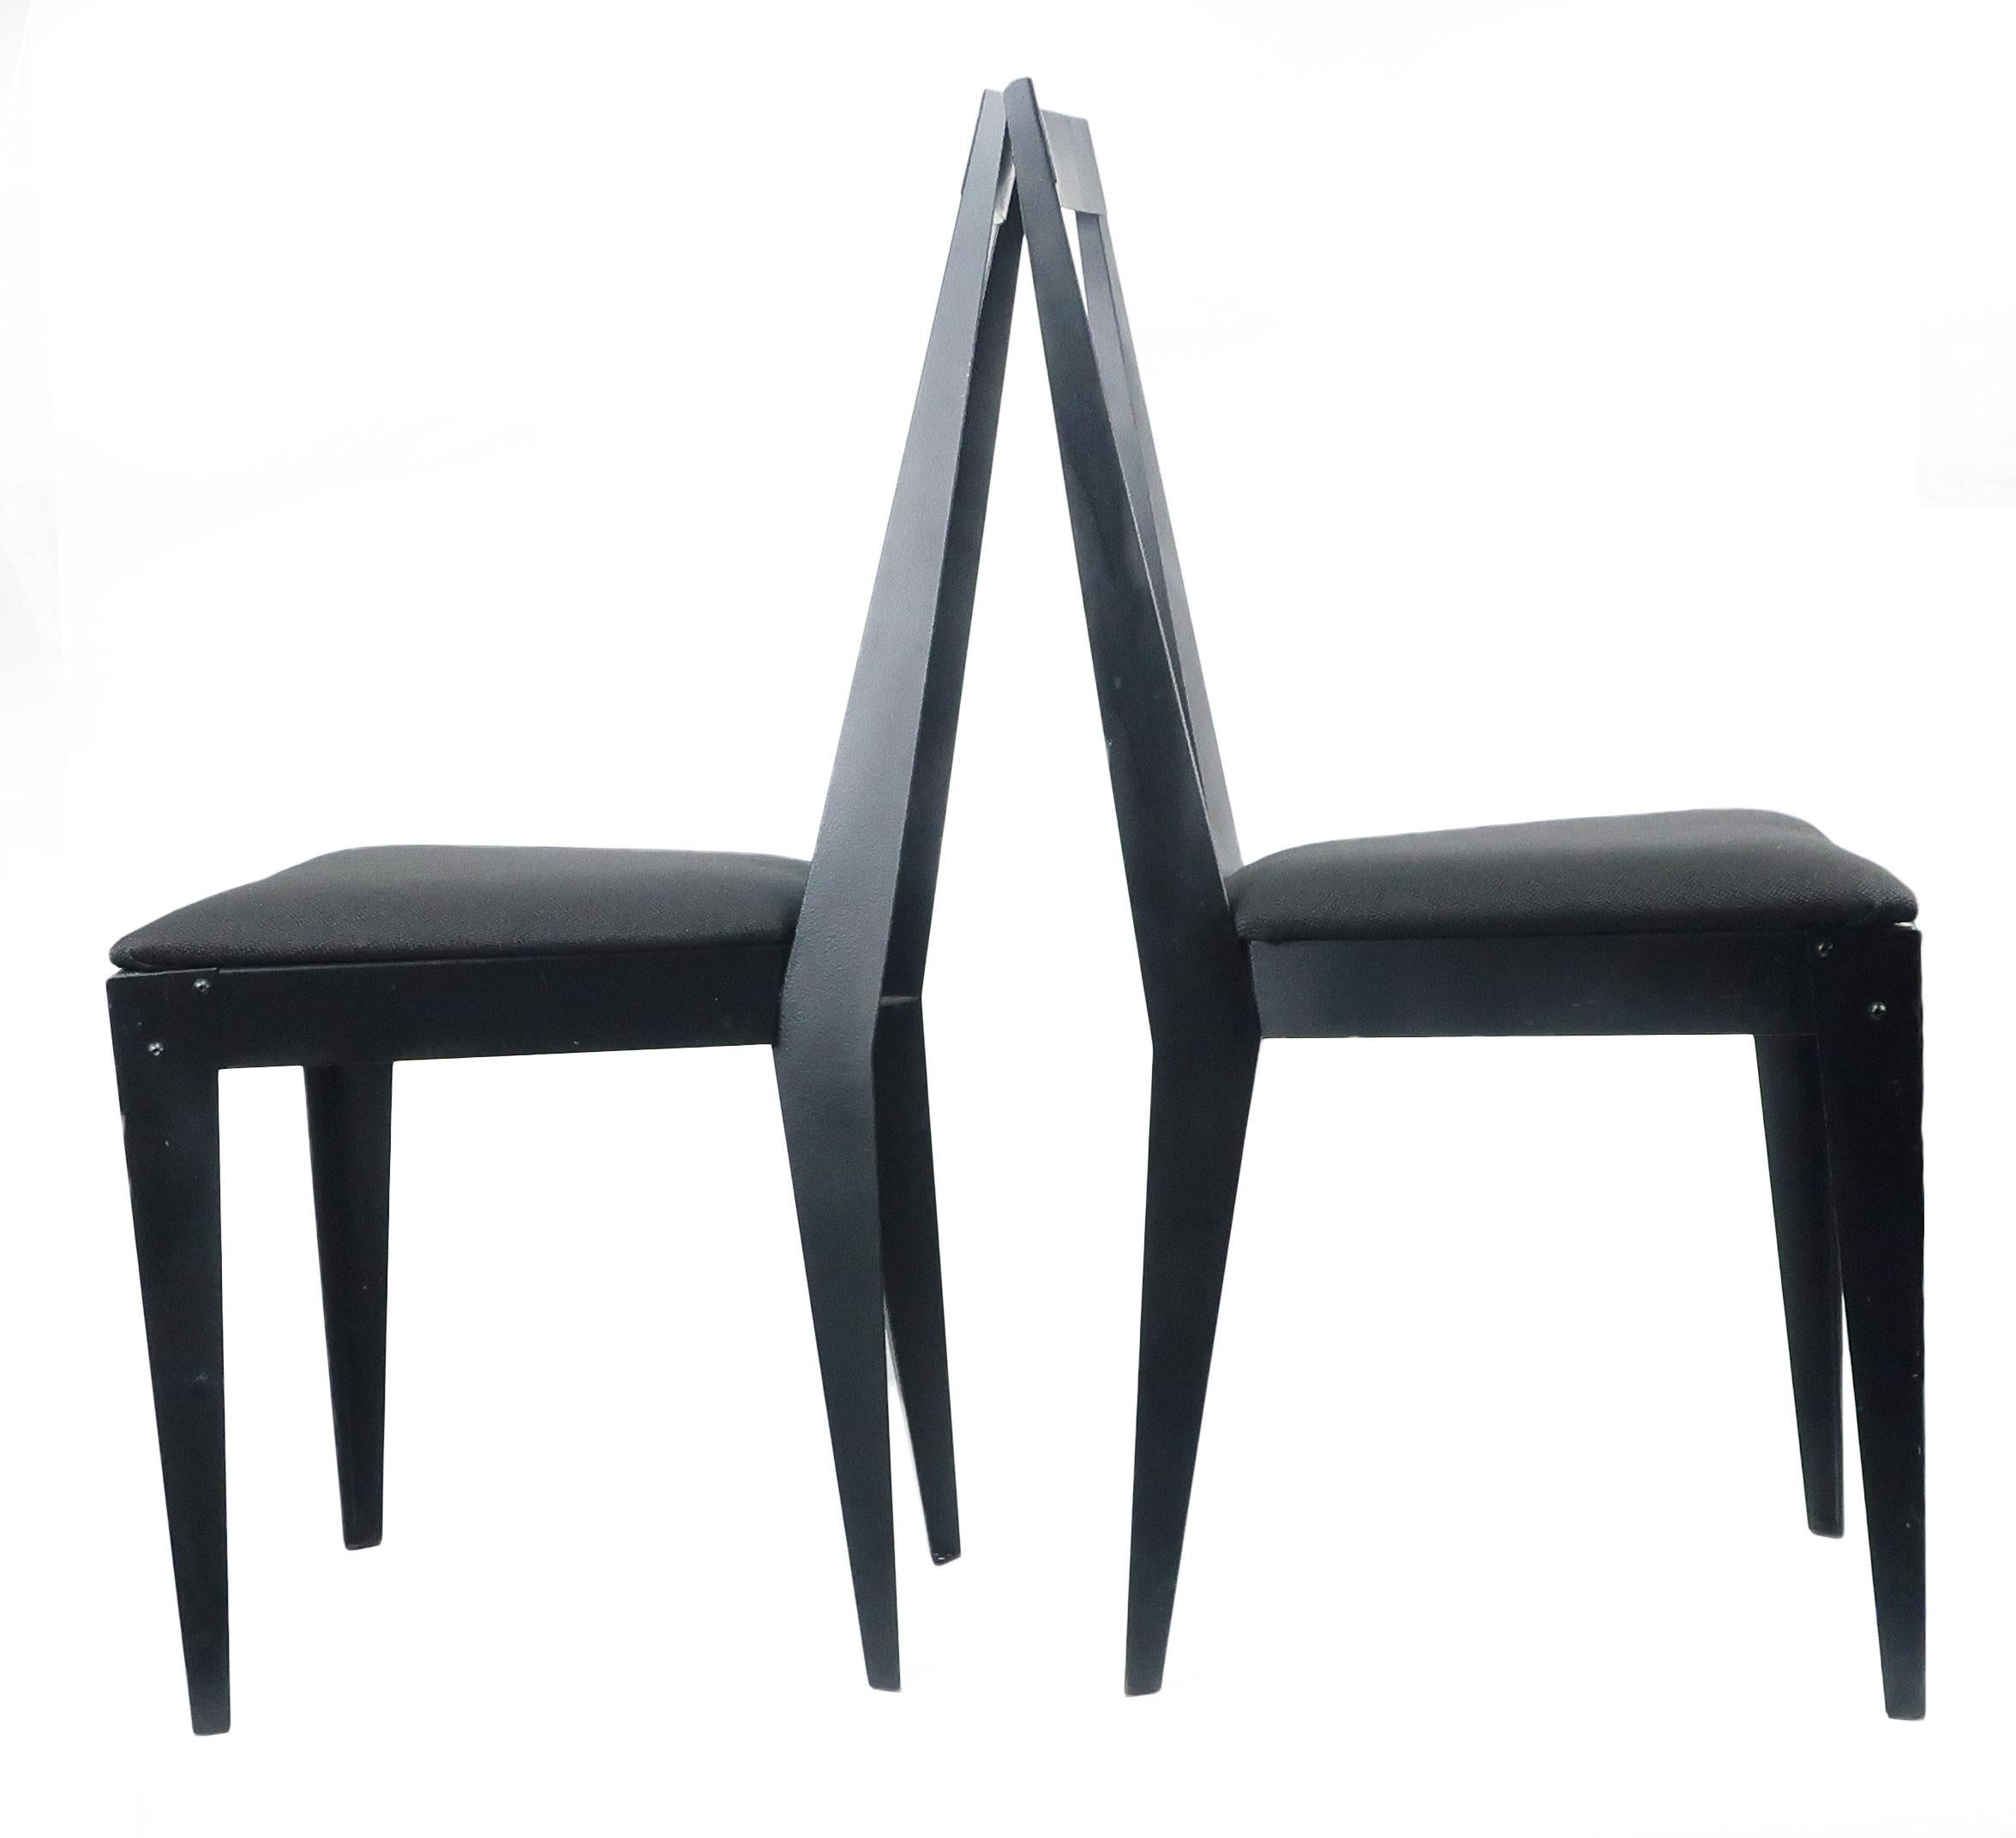 A eye-catching pair of sleek 1980s post modern angular side chairs. The Minimalist frames are all metal and seats are newly reupholstered in a vintage black upholstery.

In good vintage condition with light signs of wear consistent with age and